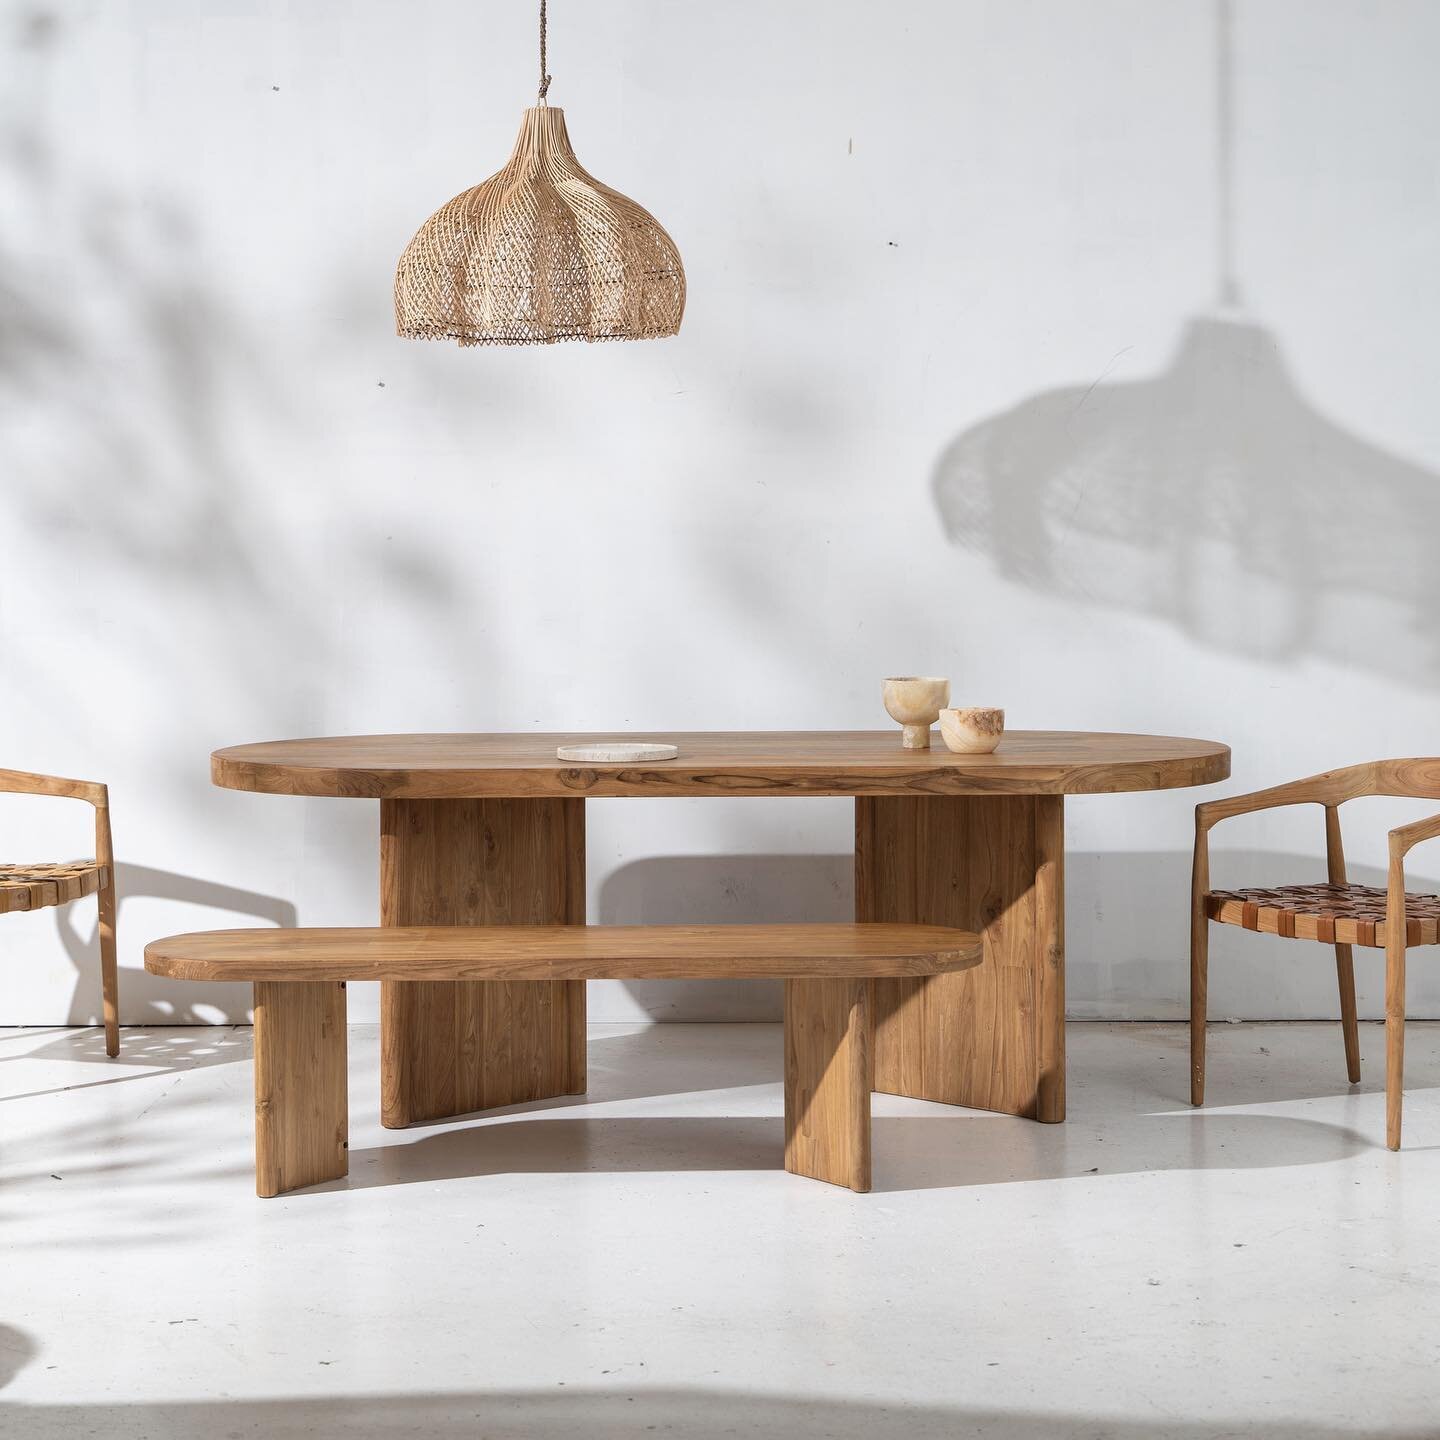 || NEW INARTISAN || 
We are so excited about the new season&rsquo;s collection from @inartisan Beautifully refined furniture pieces with curves in all the right places. Reach out  for more information hello@frtradinghouse.com.au
&bull;
&bull;
&bull;
